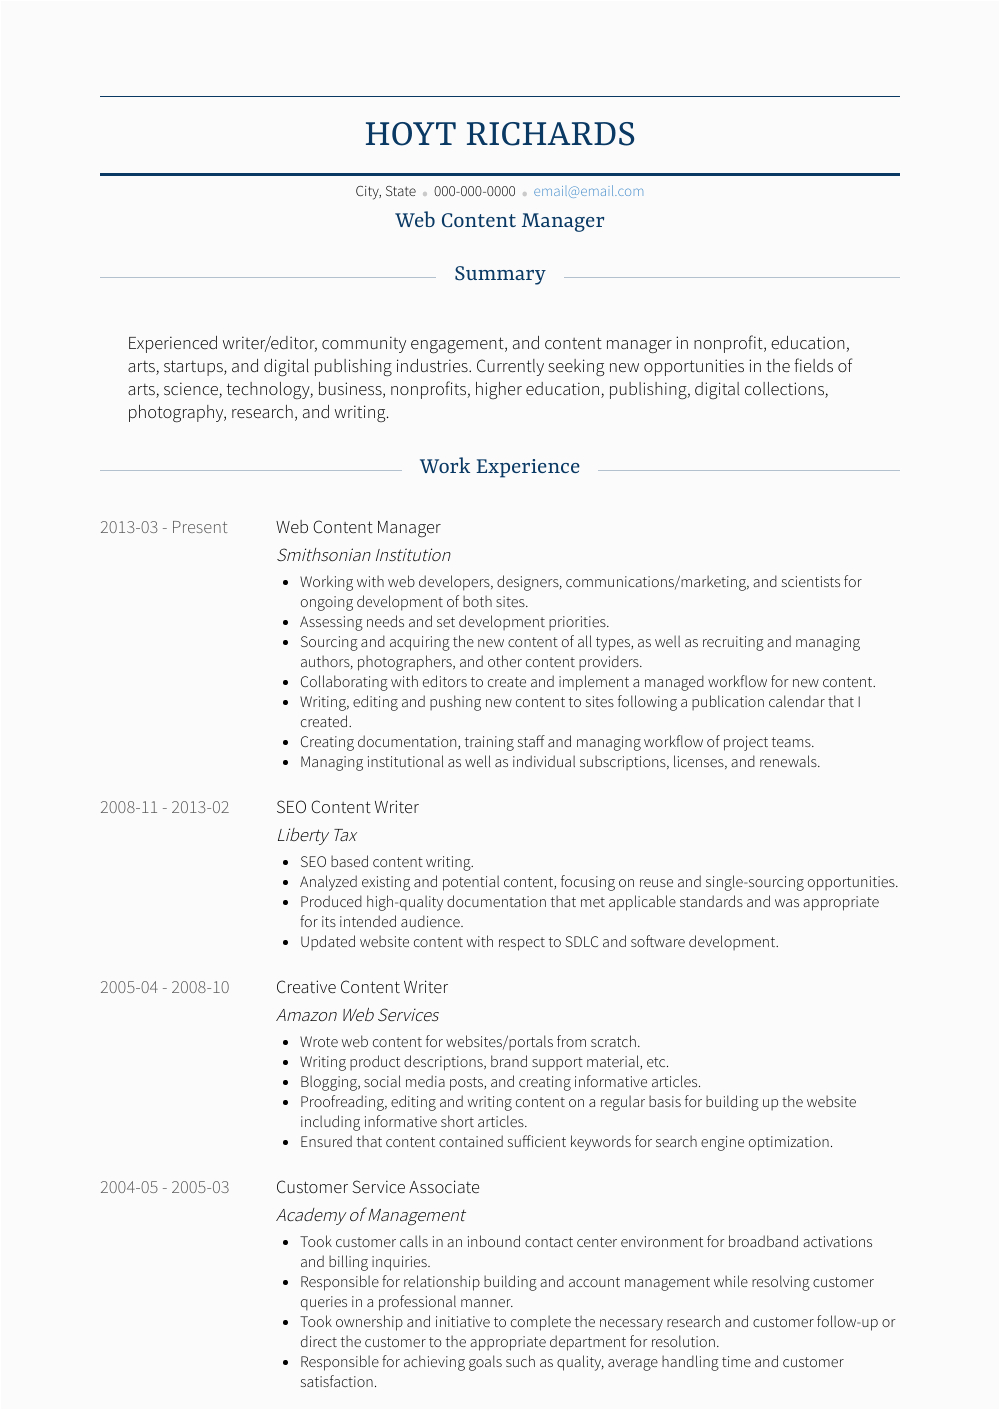 Sample Resume for Web Content Manager Web Content Manager Resume Samples and Templates